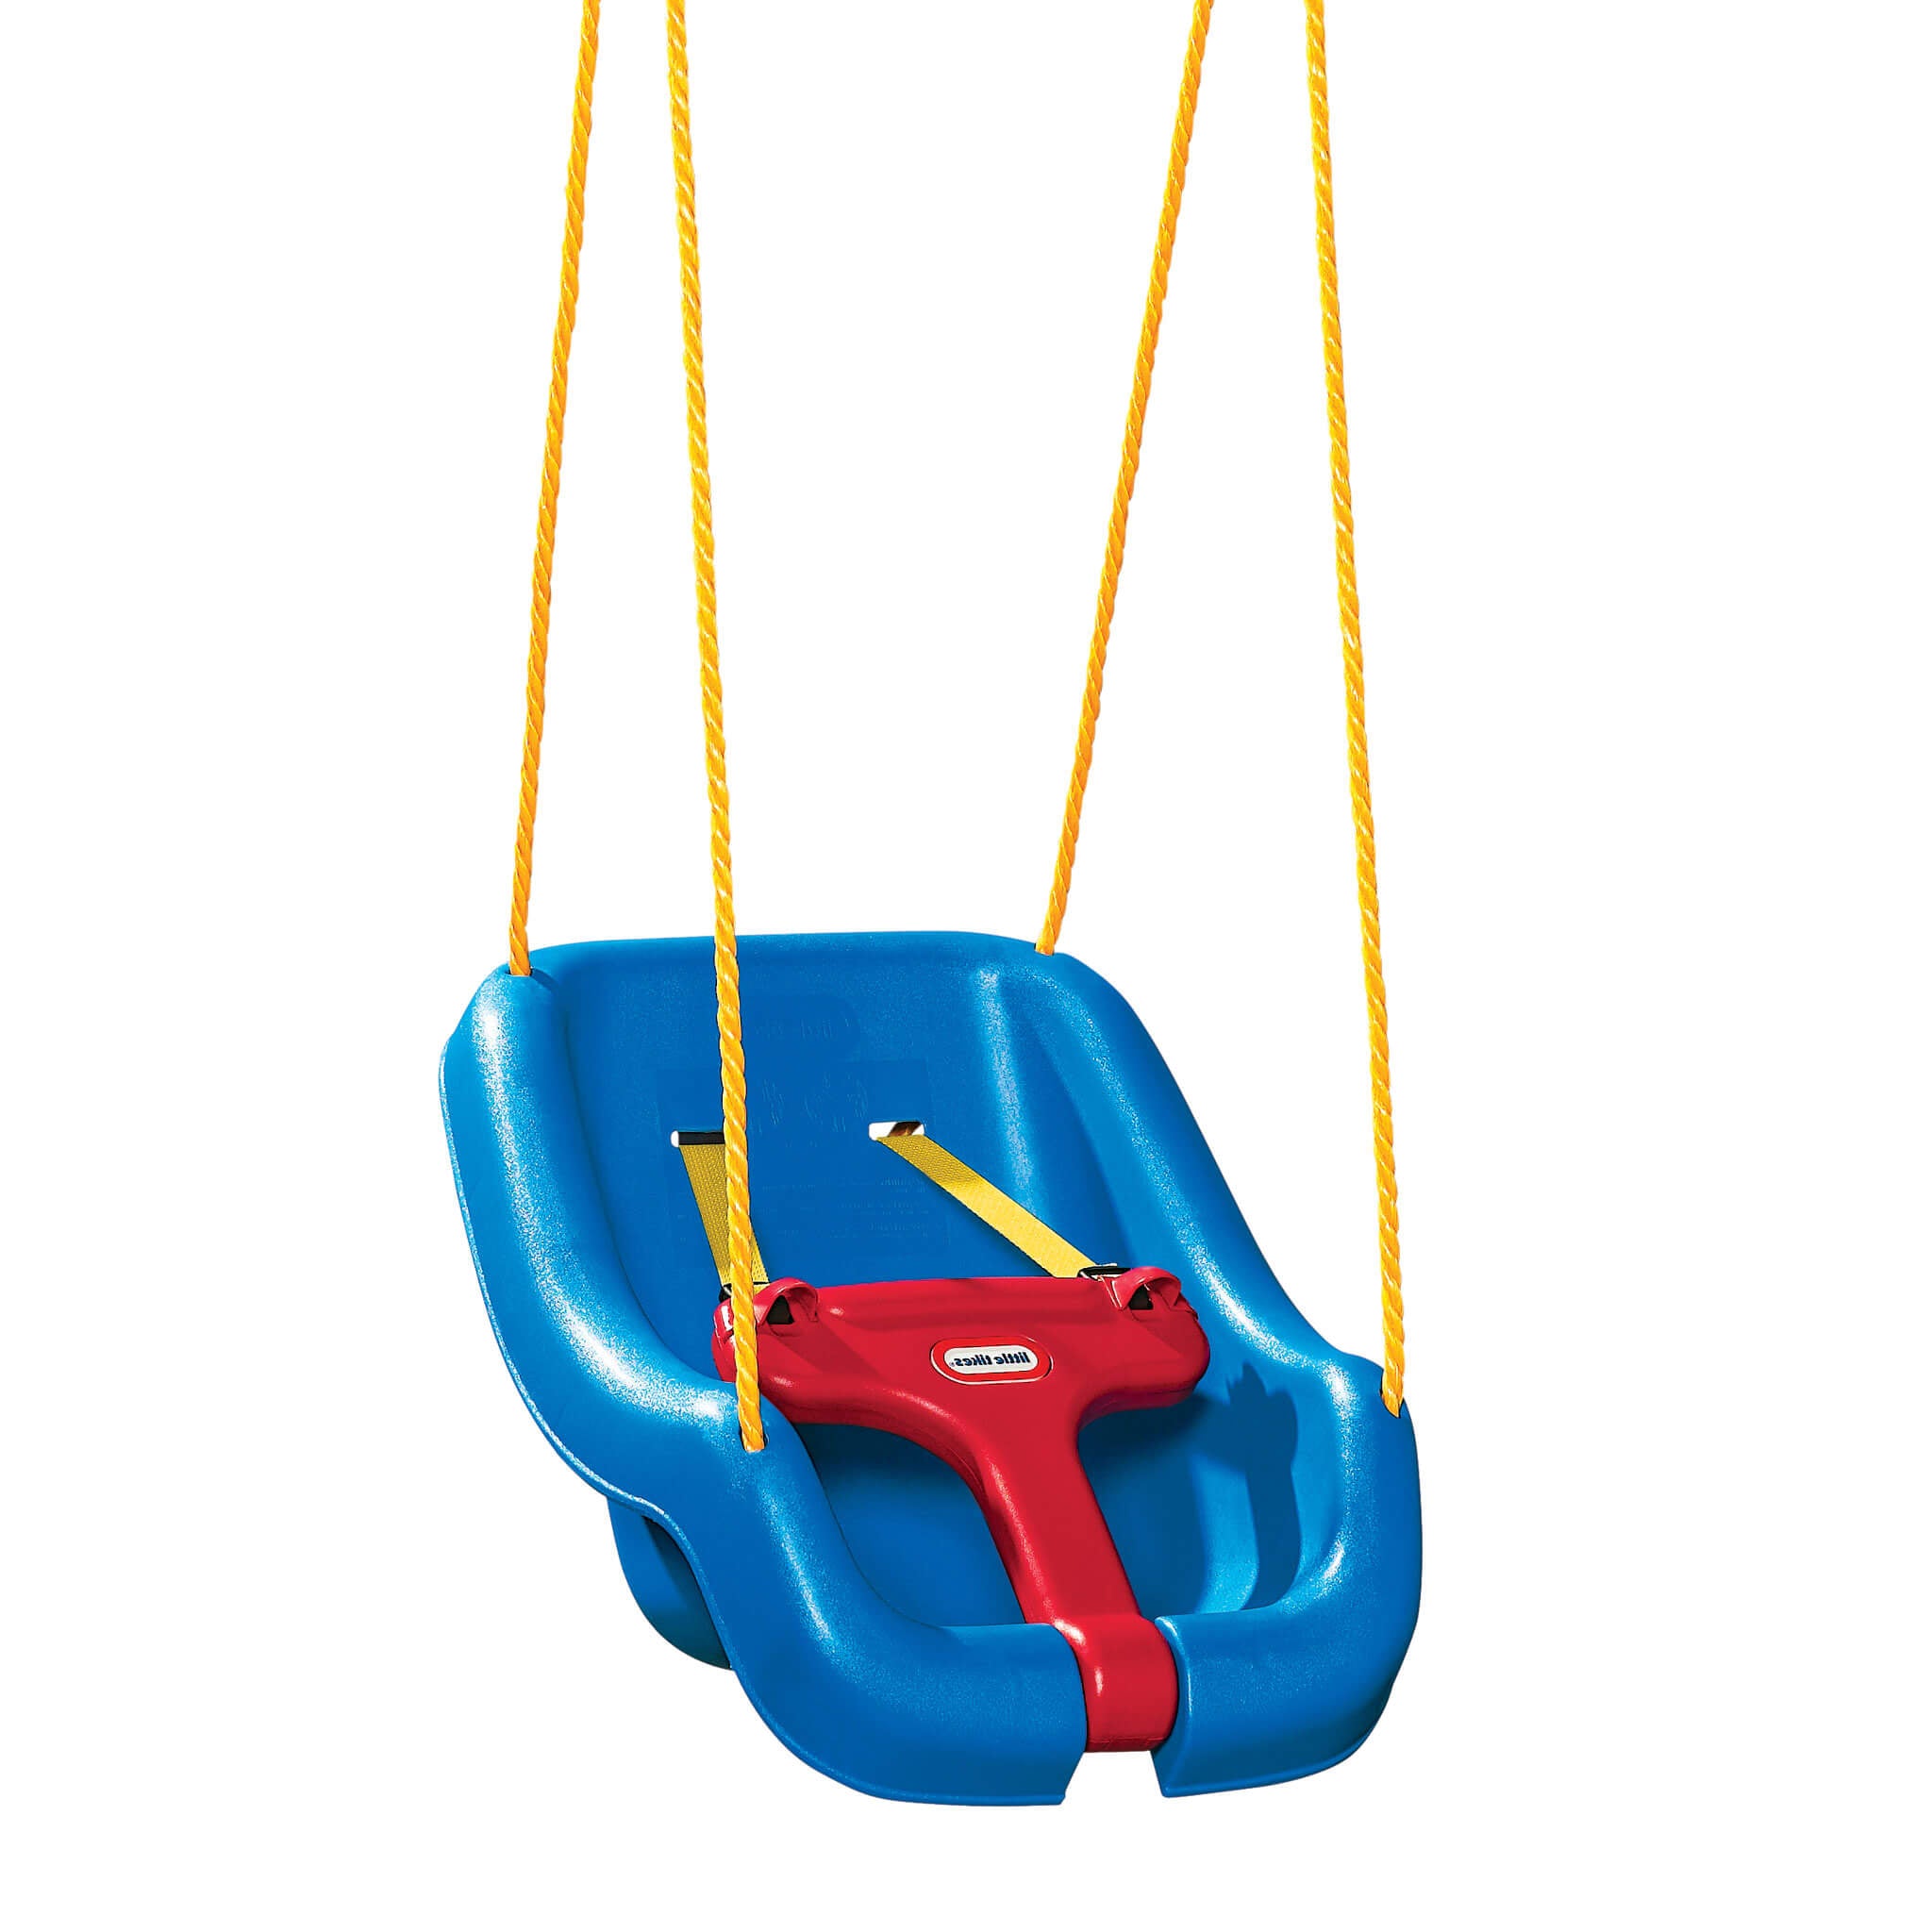 Infant to Toddler Swing™ from Step2,Kids Toys